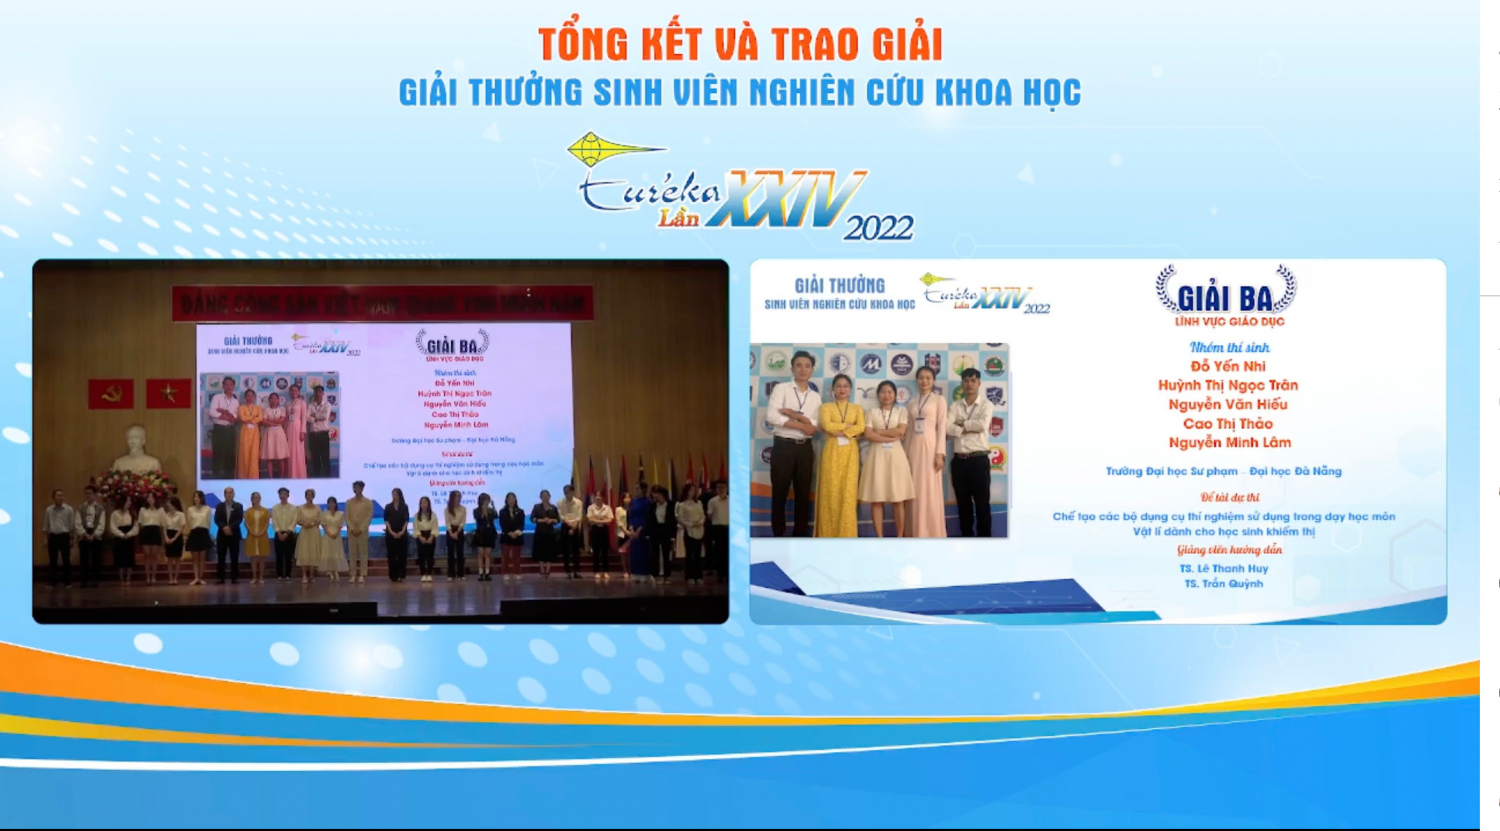 Students of the University of Danang - University of Science and Education achieved good results at the 24th Student Scientific Research Award – Euréka in 2022